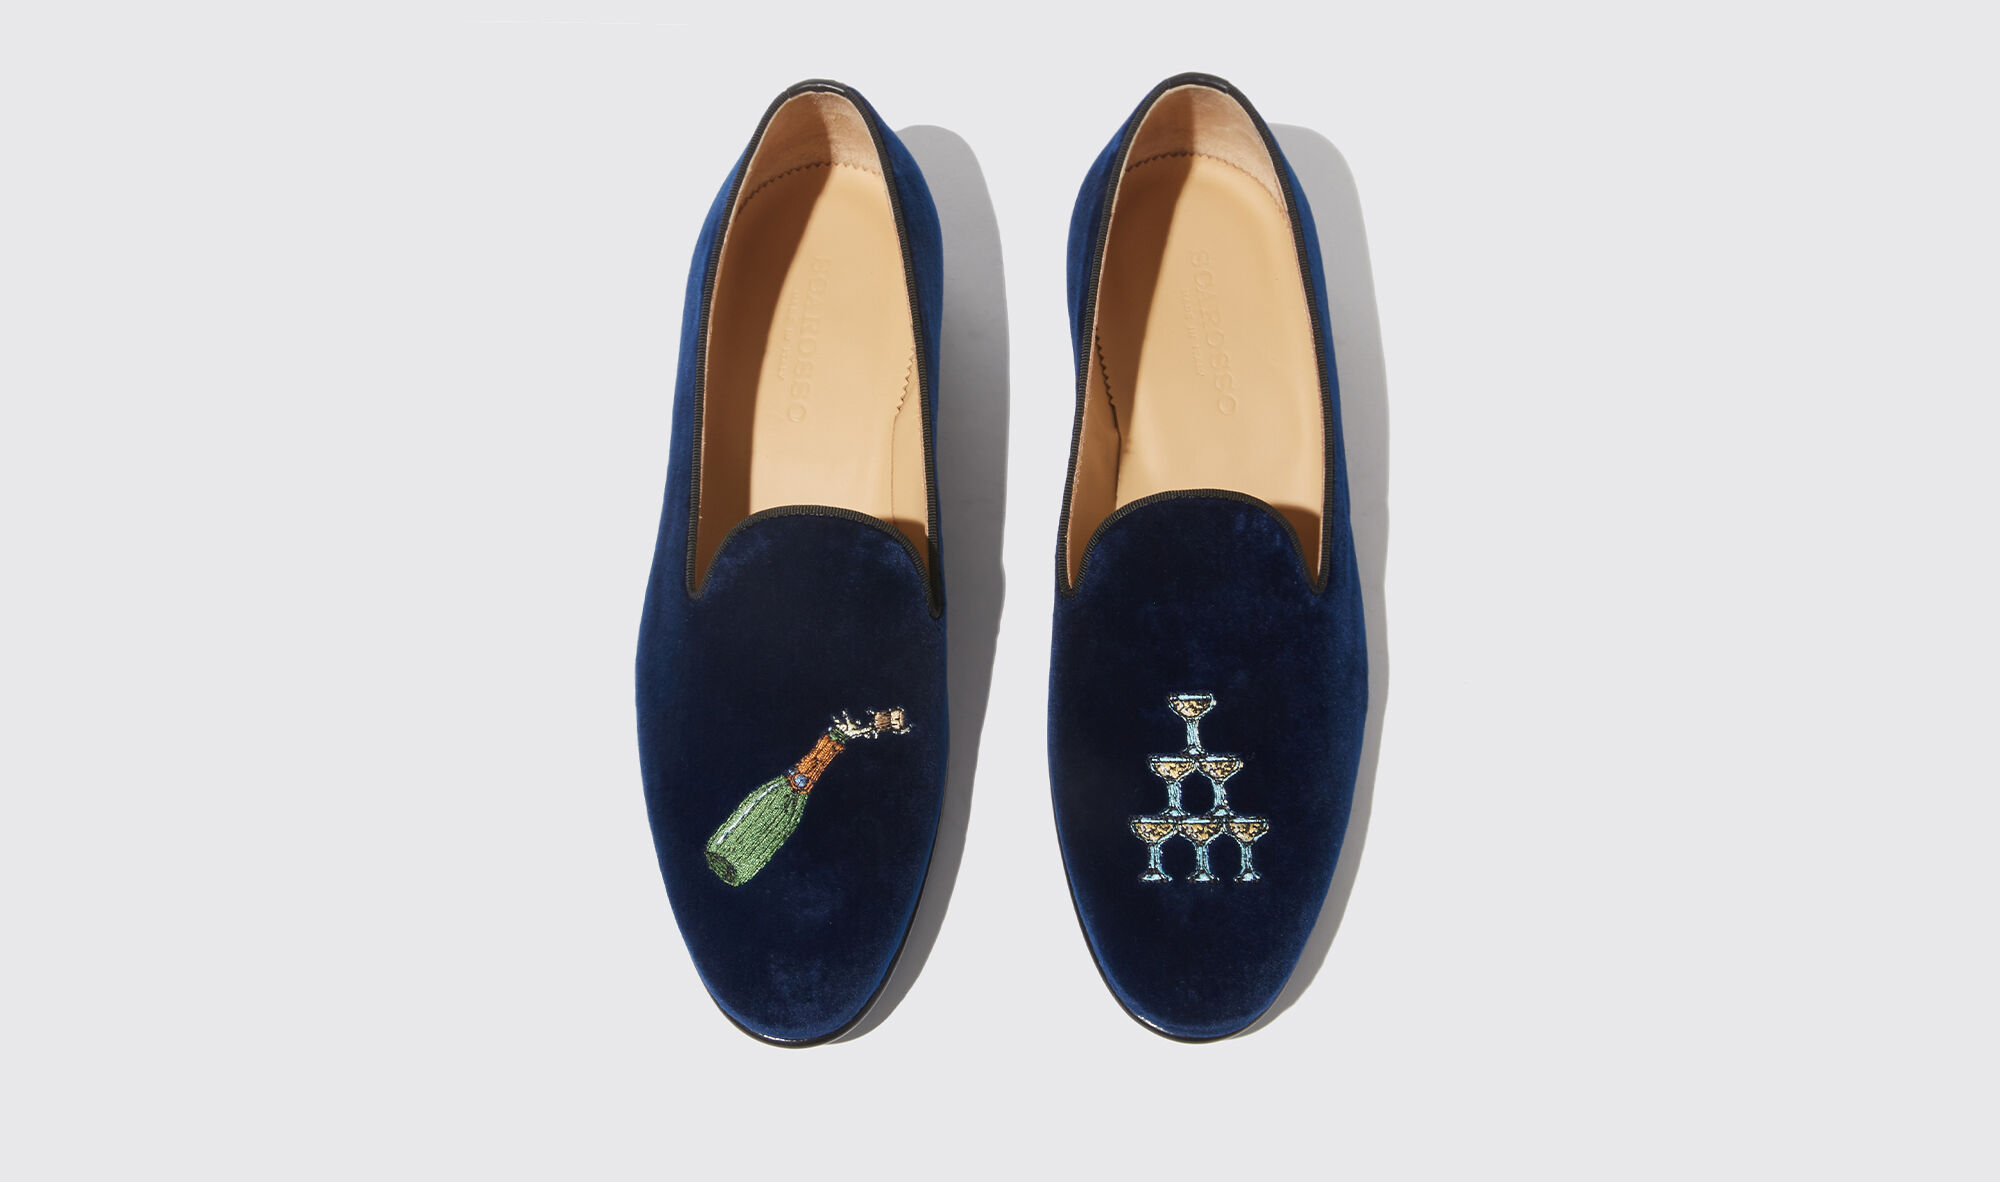 Blue Velvet Suede Gold Embroidery Bee Mens Oxfords Loafers Dress Shoes  Flats  Velvet shoes Blue velvet shoes Velvet loafers